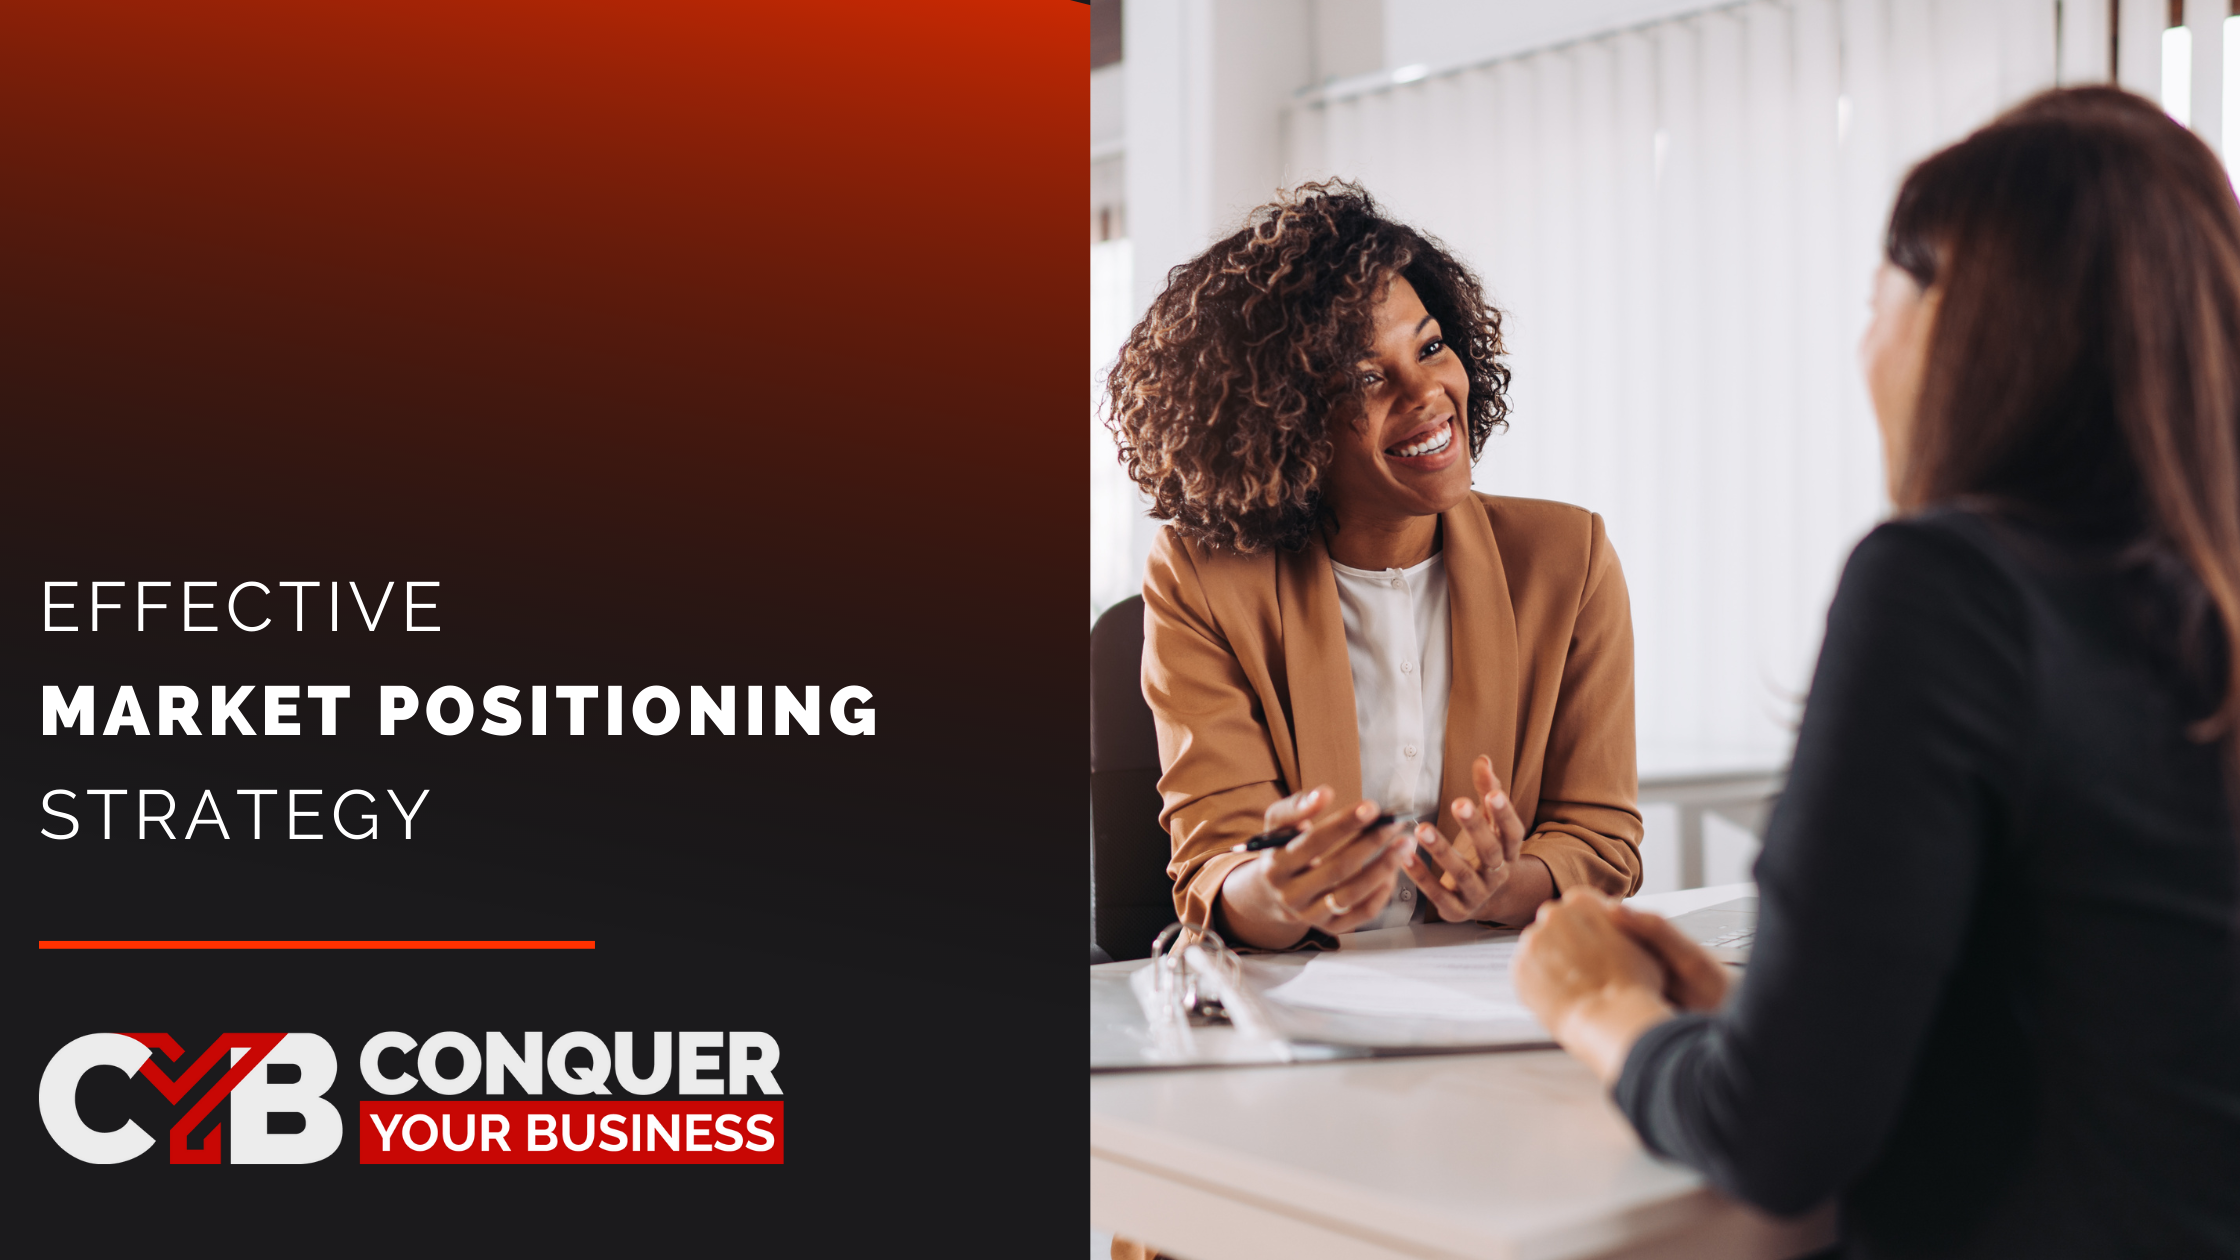 Blog Header Image for Conquer Your Business blog post Effective Market Positioning Strategy, two women pictured who are working on a business deal